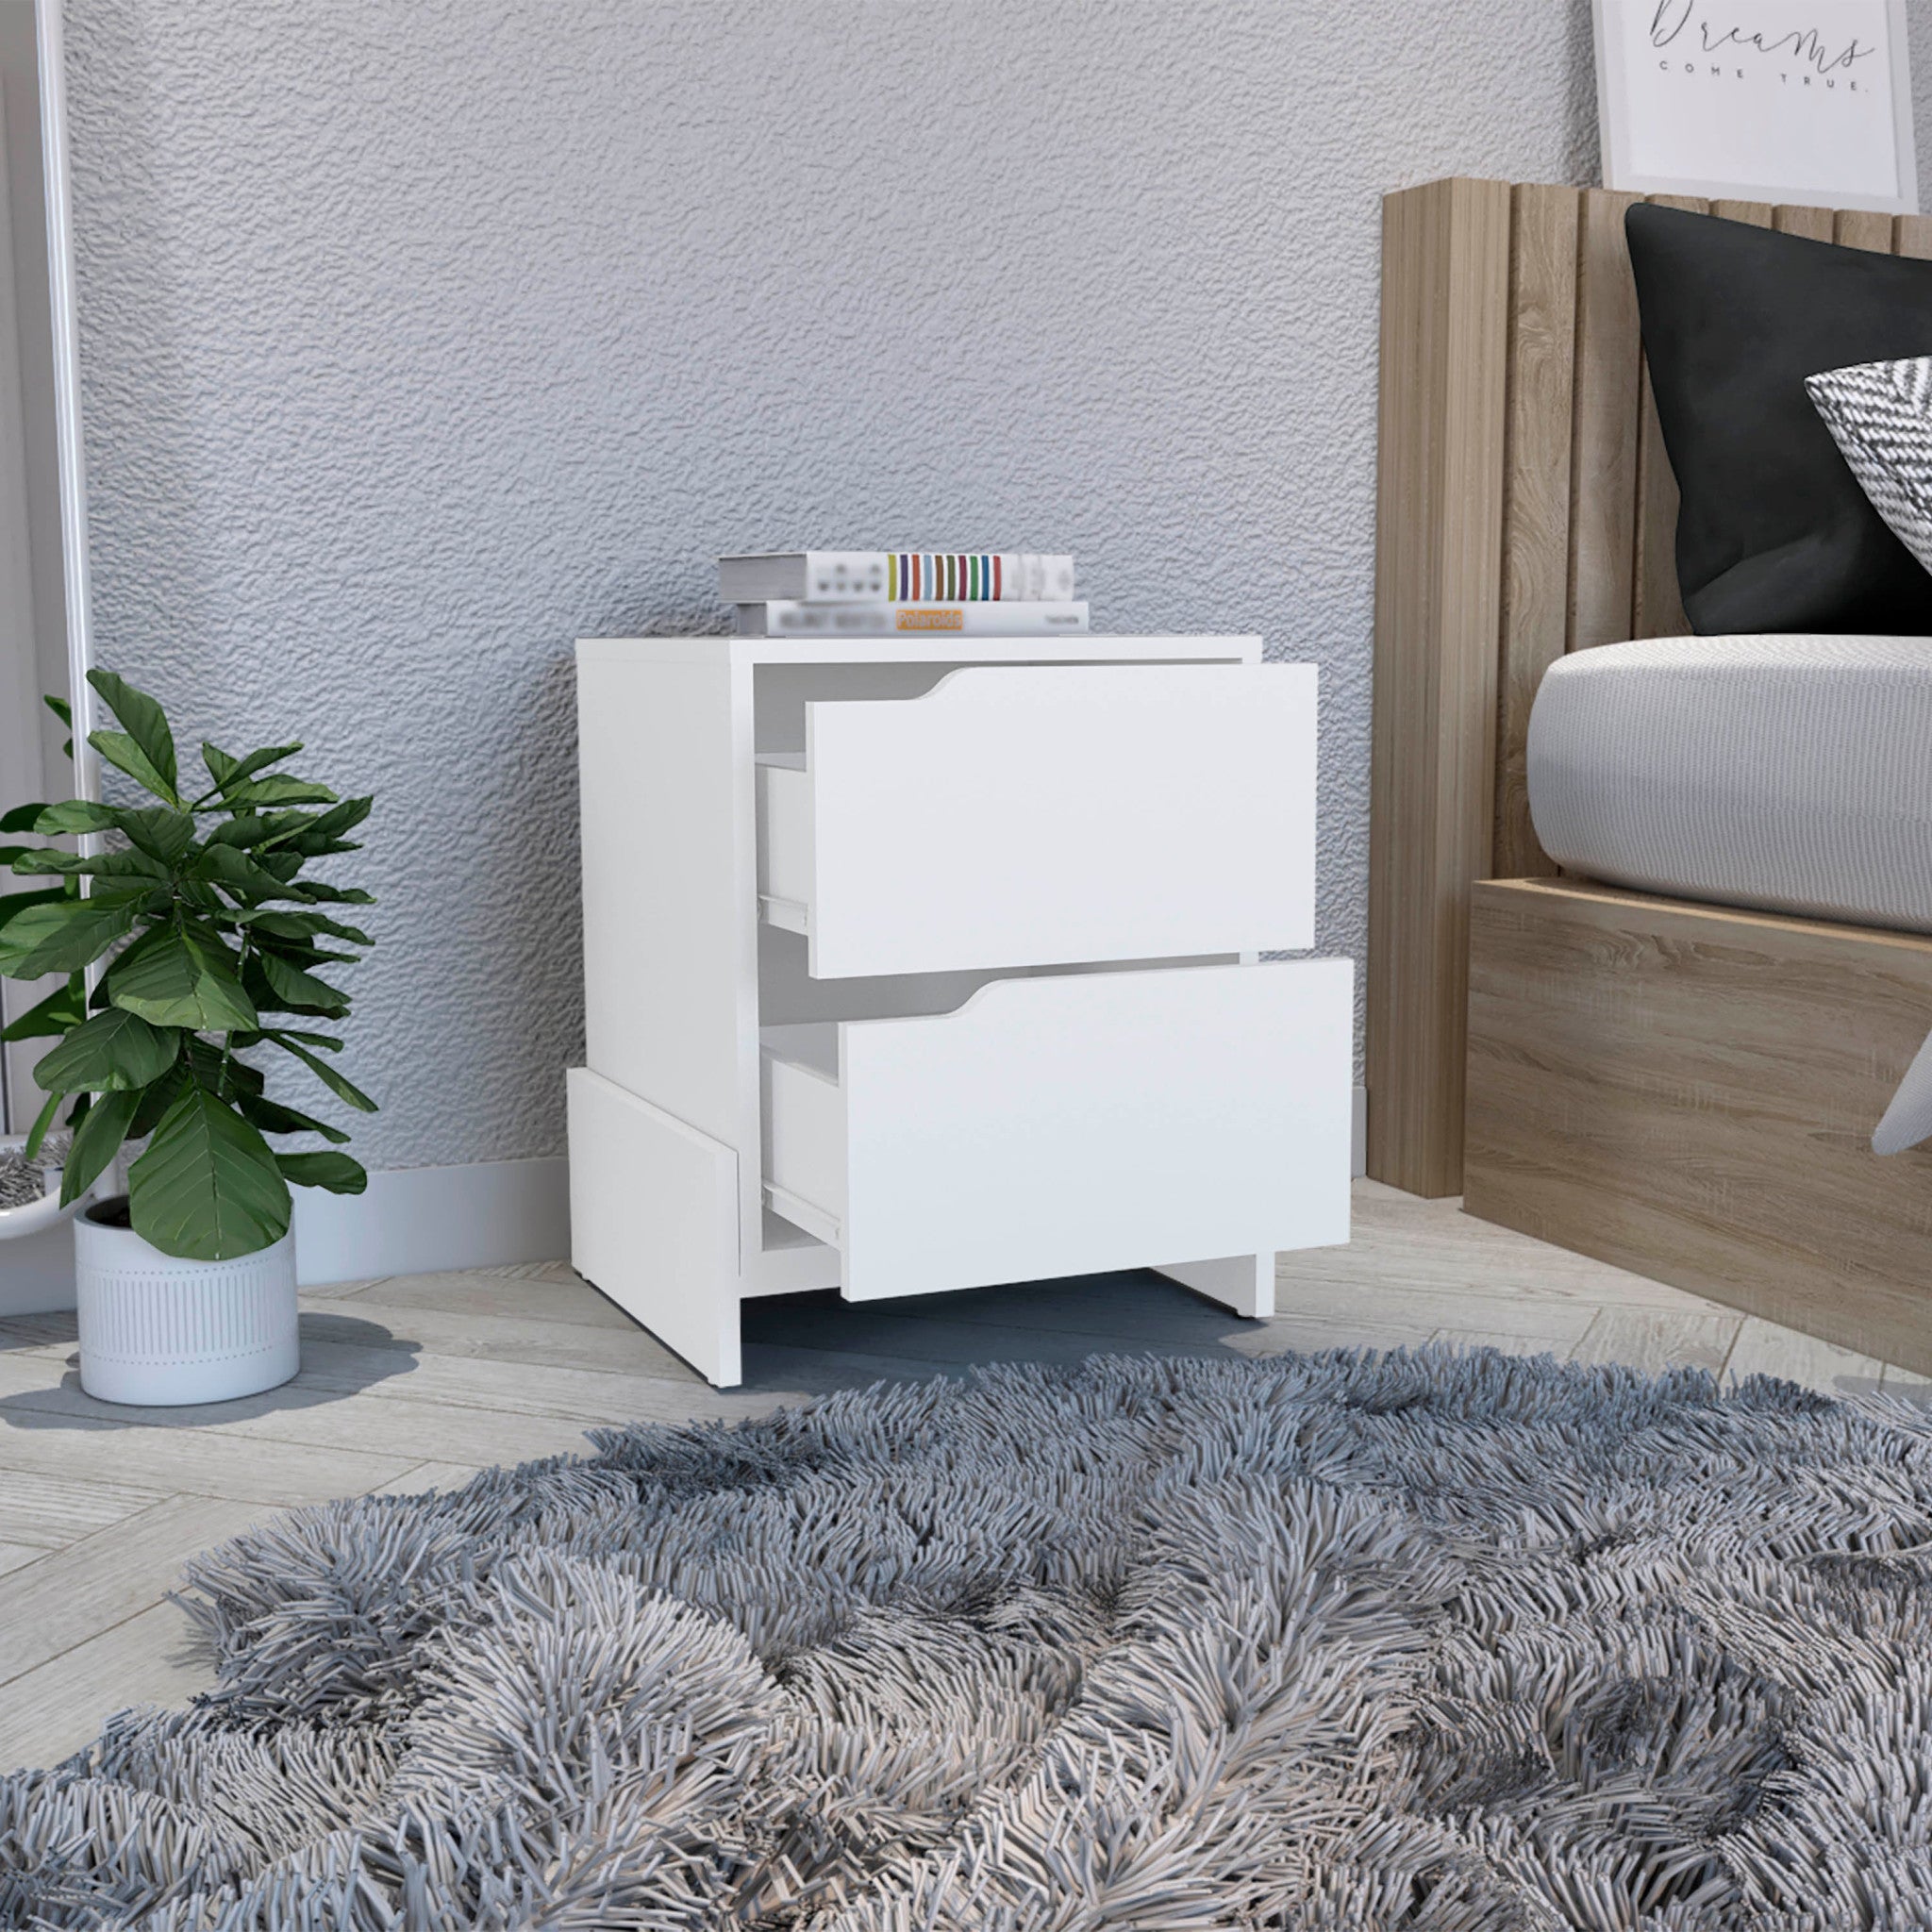 20" White Two Drawer Faux Wood Nightstand